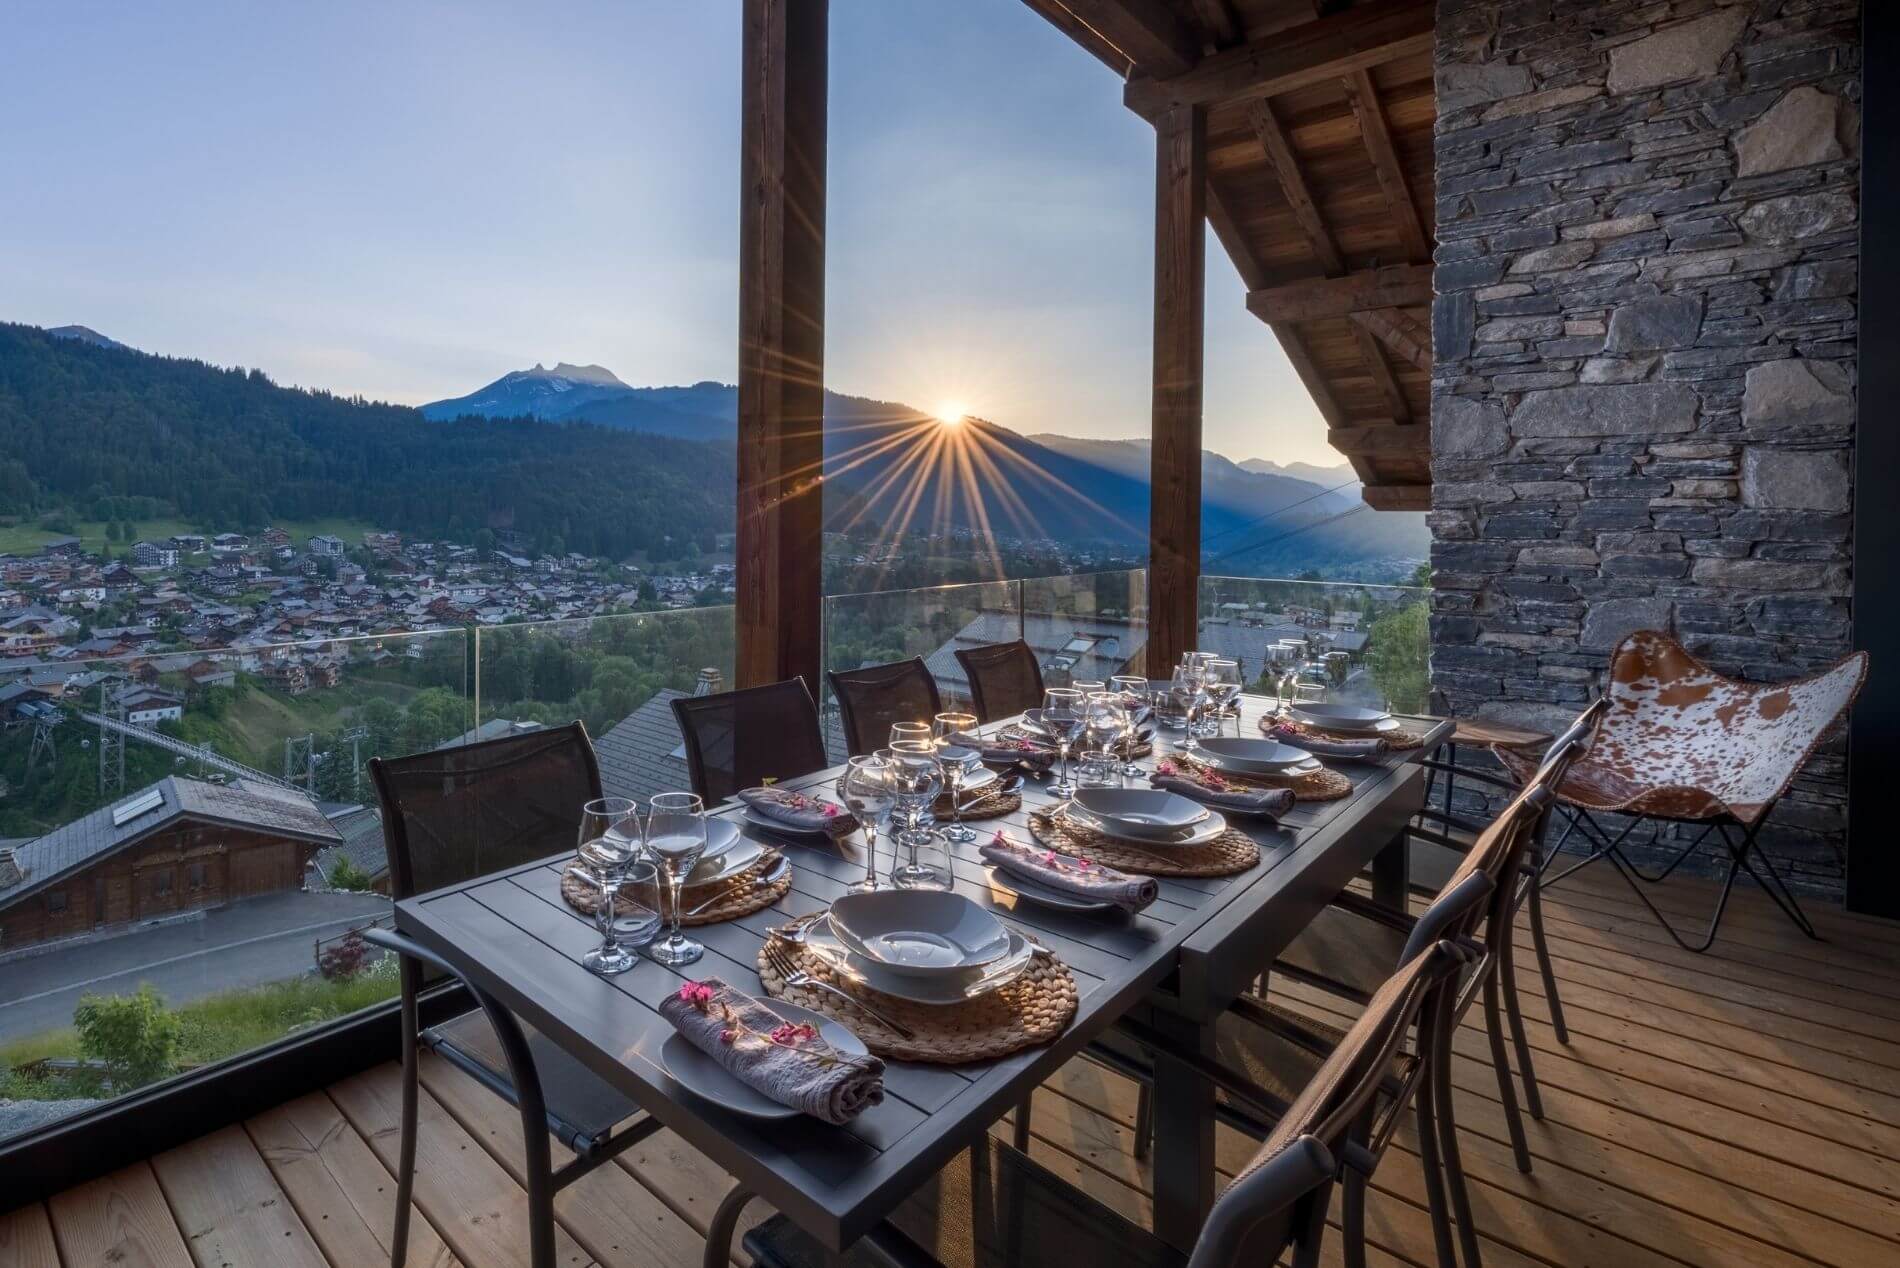 Outdoor dining at Chalet Griffonner, Morzine, France